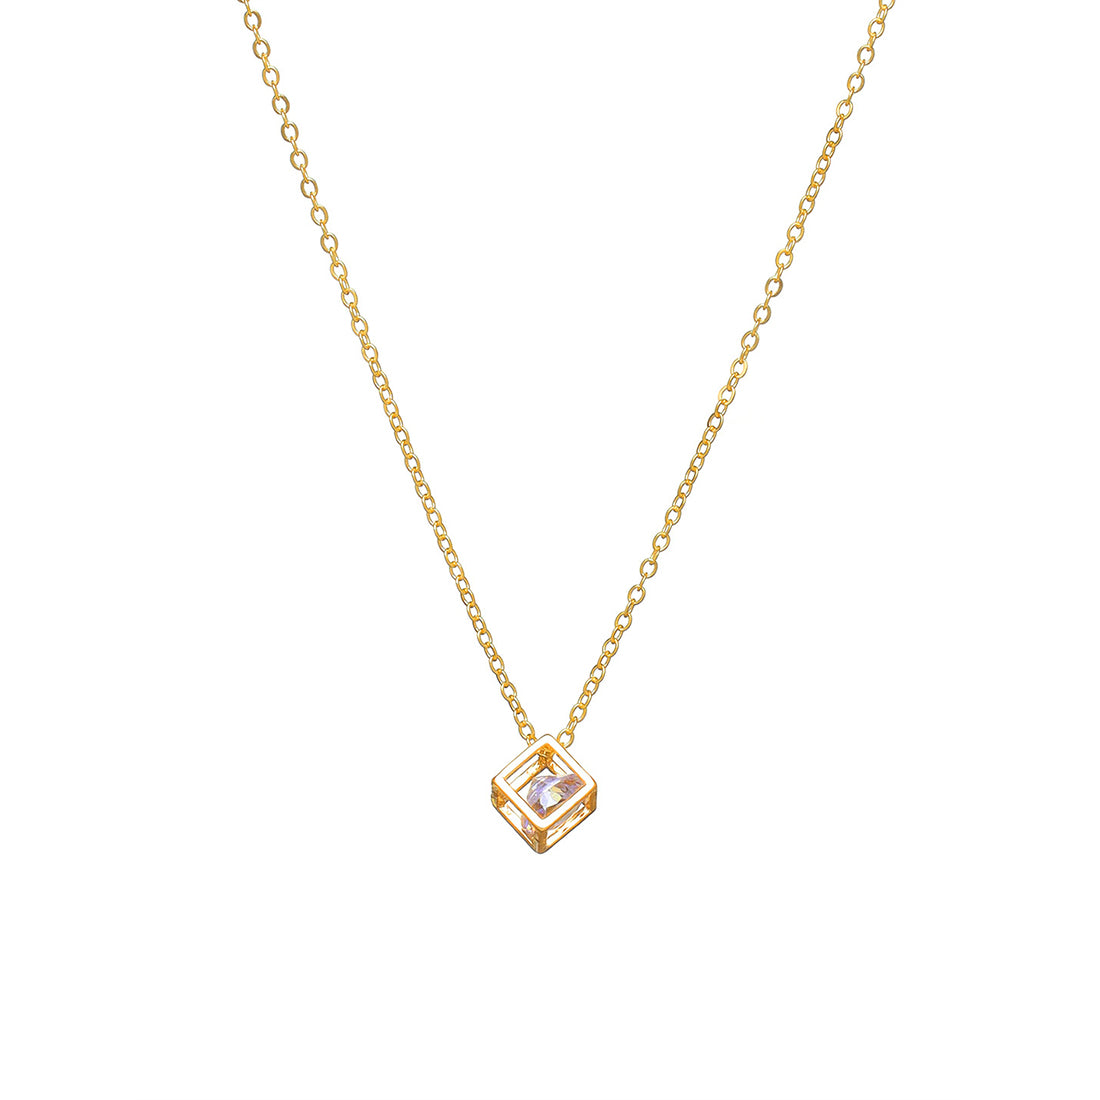 Single Layer Dainty Gold Necklace - 3D Cube with Diamante